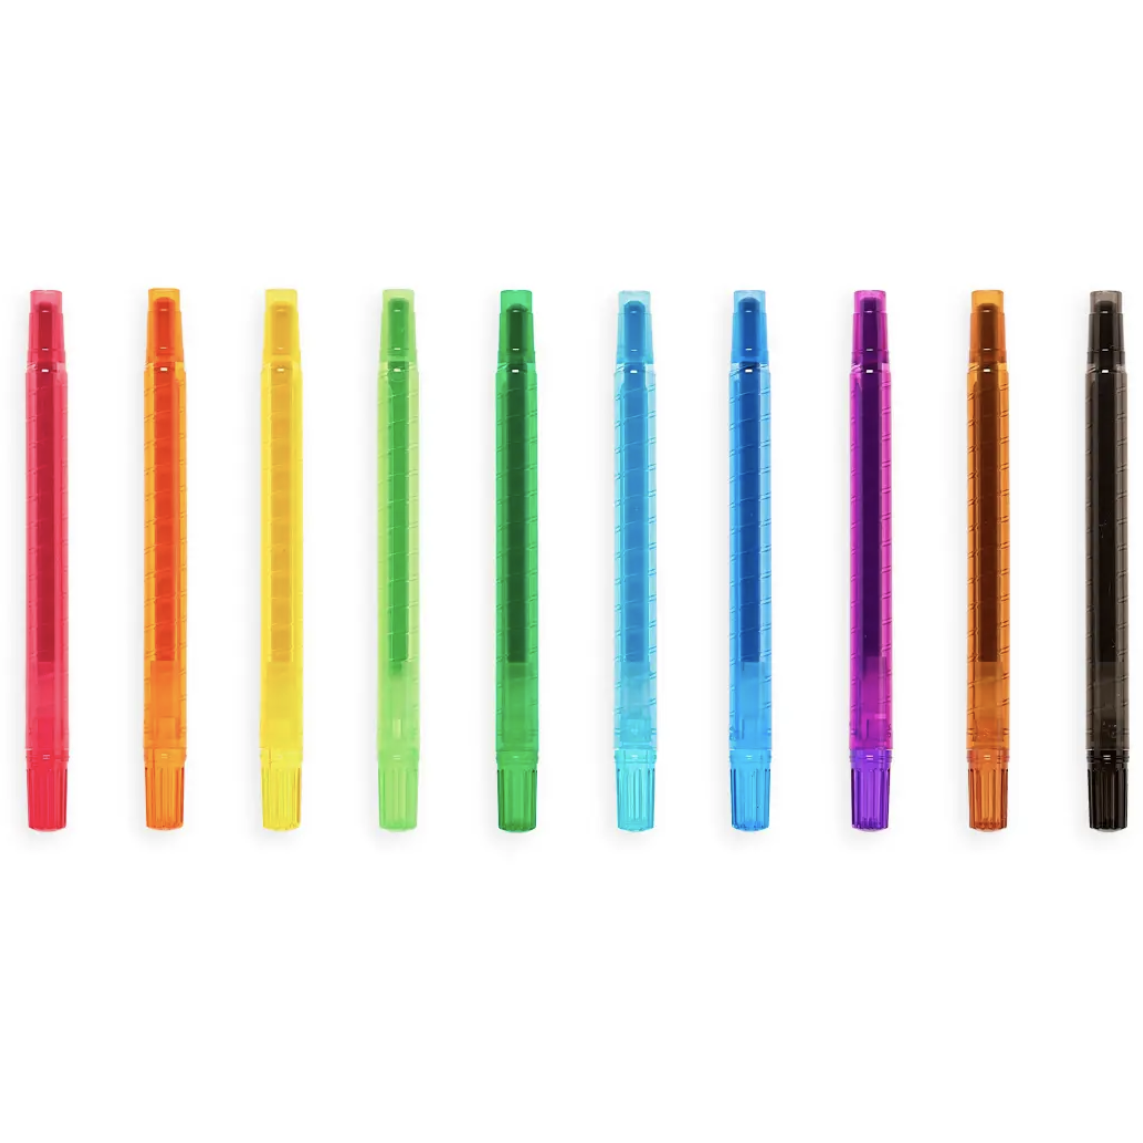 Yummy Yummy Scented Twist Up Crayons by Ooly